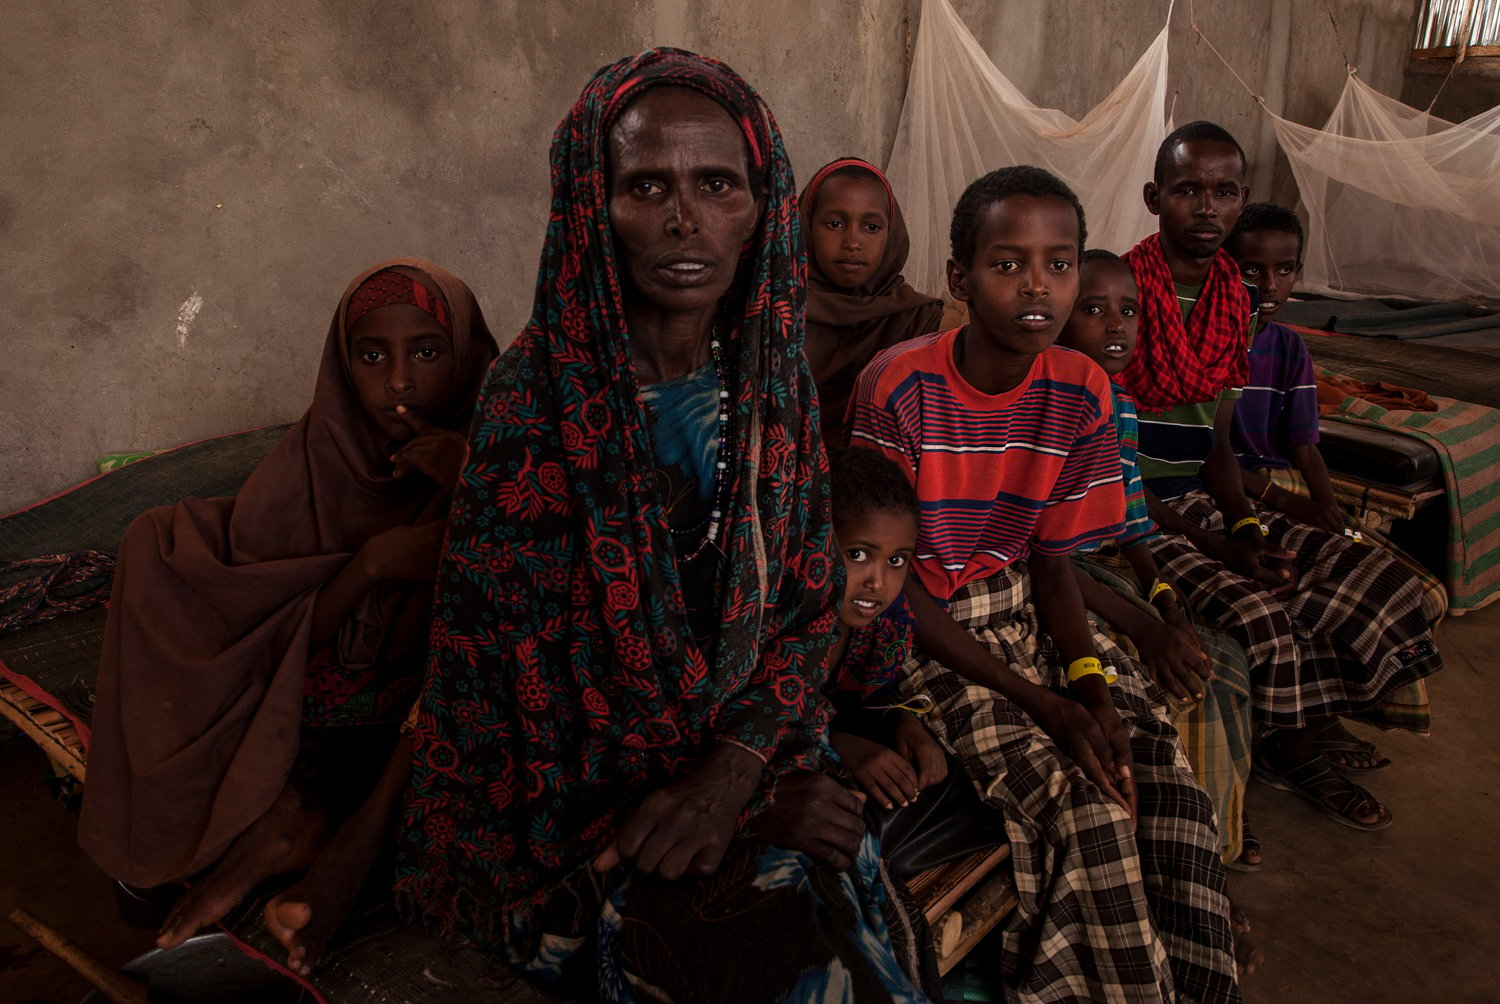 Ethiopia. Aisha and her seven have just arrived to Ethiopia after fleeing the drought in Somalia